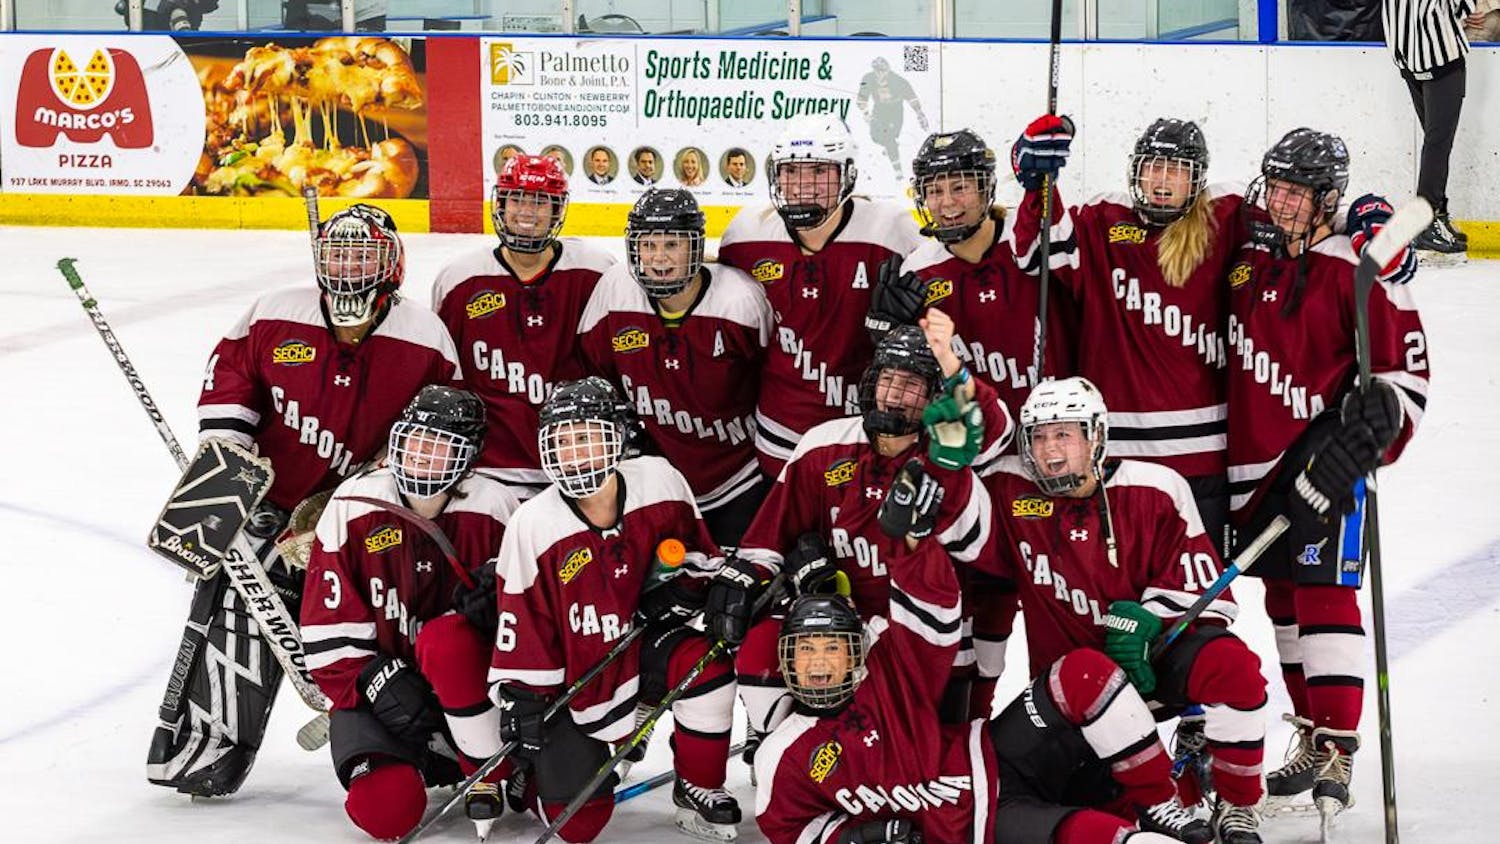 The University of South Carolina's women's hockey team huddles together for a team photo after its 2-1 victory against the South Carolina Lady Warriors on Oct. 1, 2023, in Irmo, South Carolina. This matchup marks the first collegiate women's hockey game to be played in the 247-year history of South Carolina.